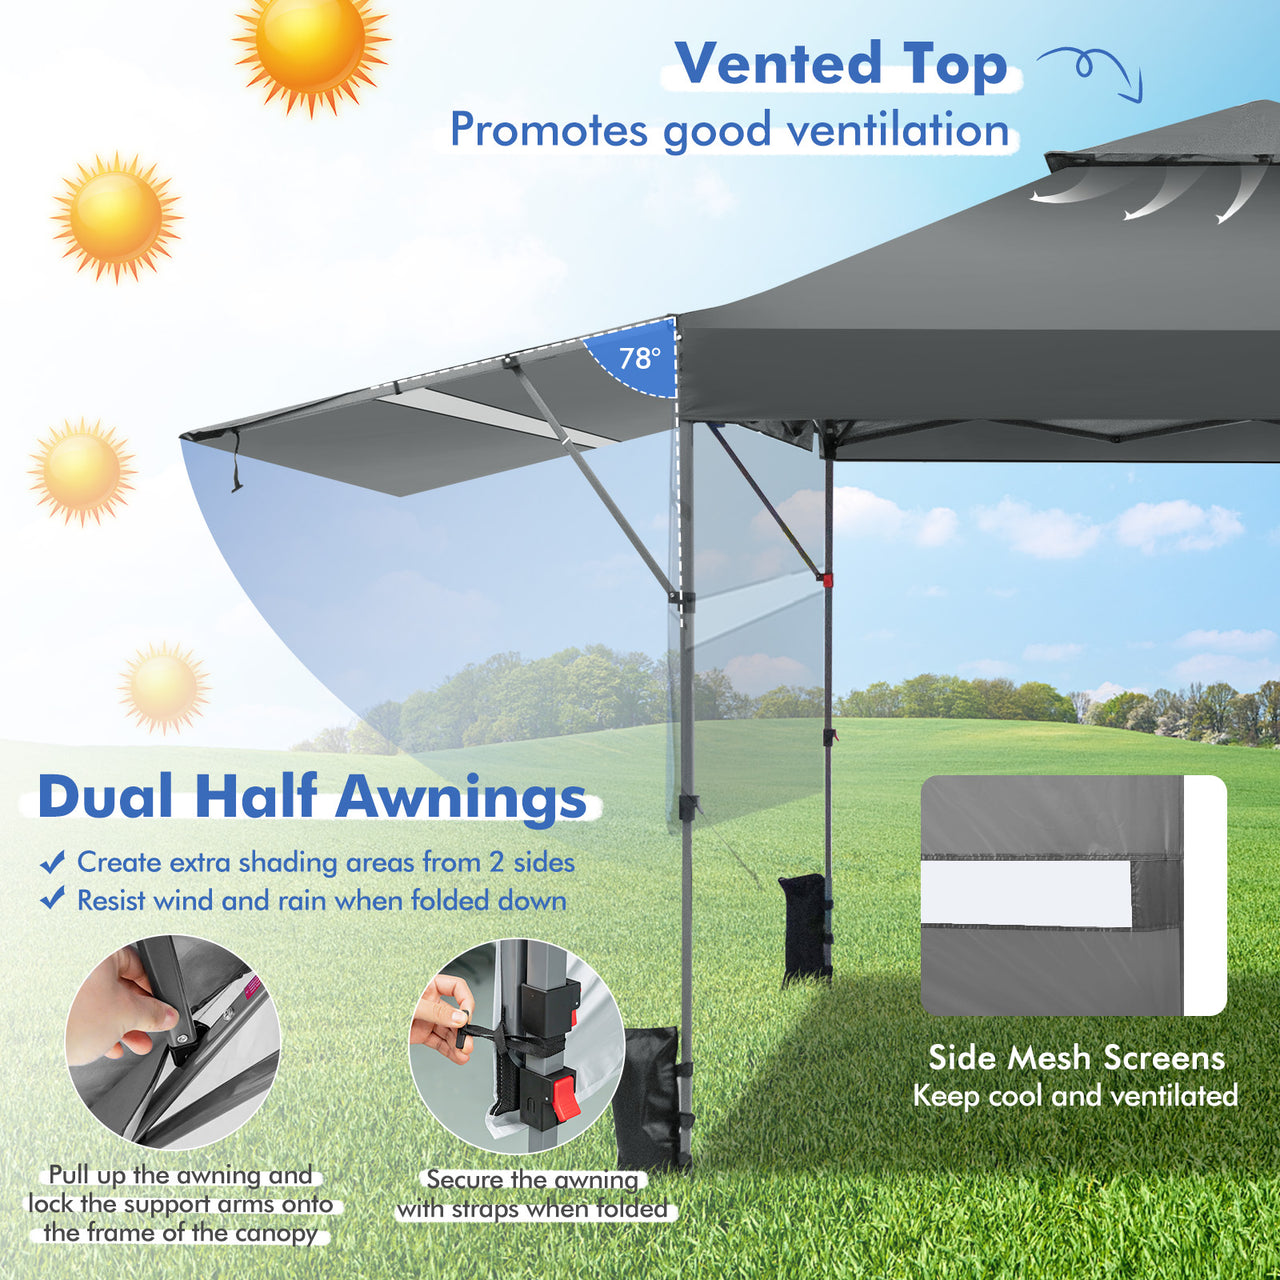 10 x 17.6 Feet Outdoor Instant Pop-up Canopy Tent with Dual Half Awnings - Gallery View 7 of 10